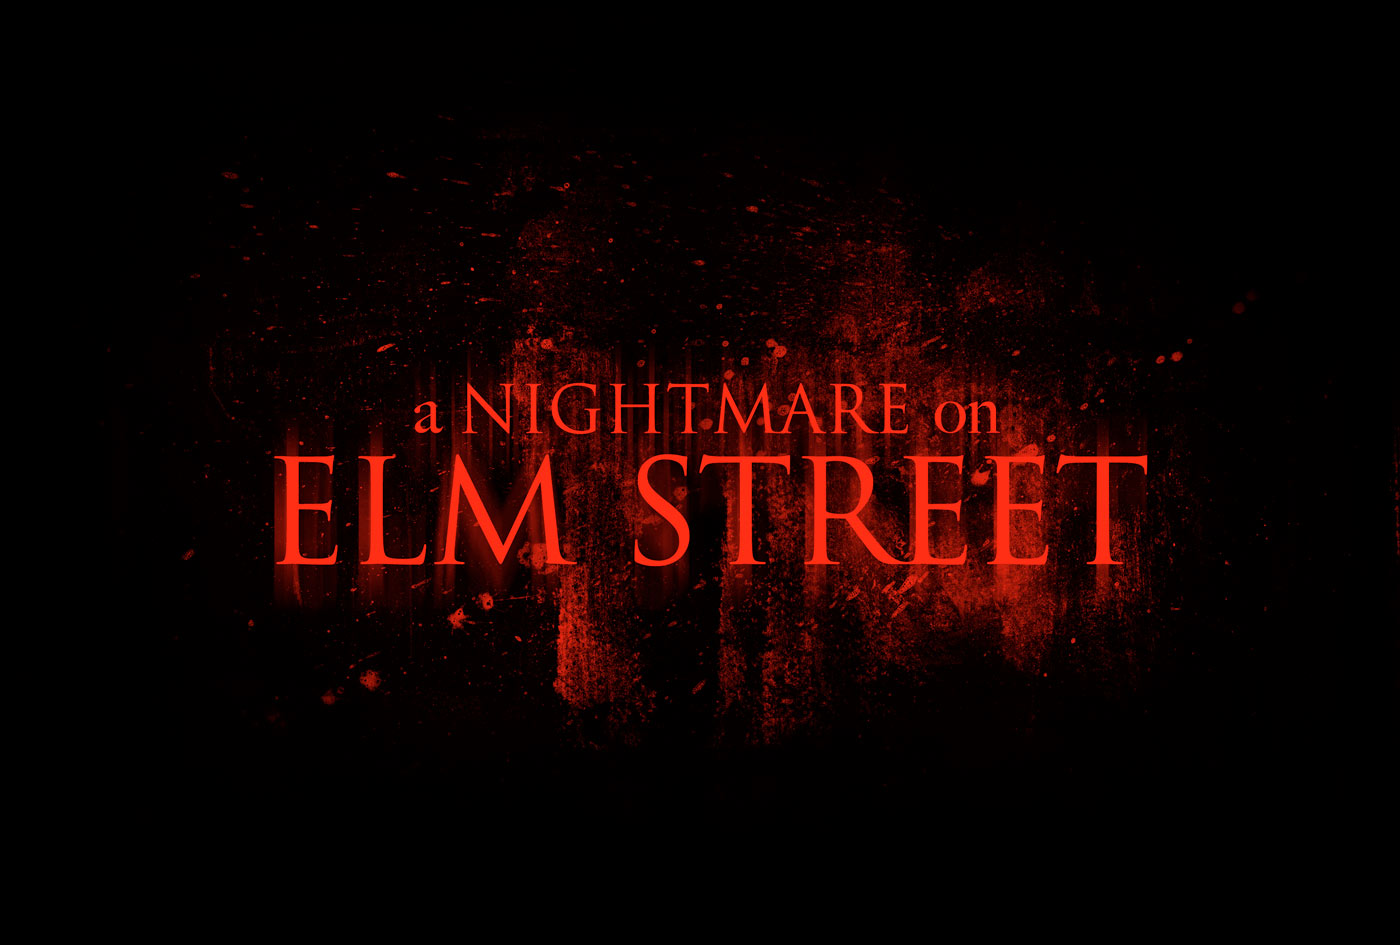 A Nightmare On Elm Street (2010) Backgrounds, Compatible - PC, Mobile, Gadgets| 1400x945 px